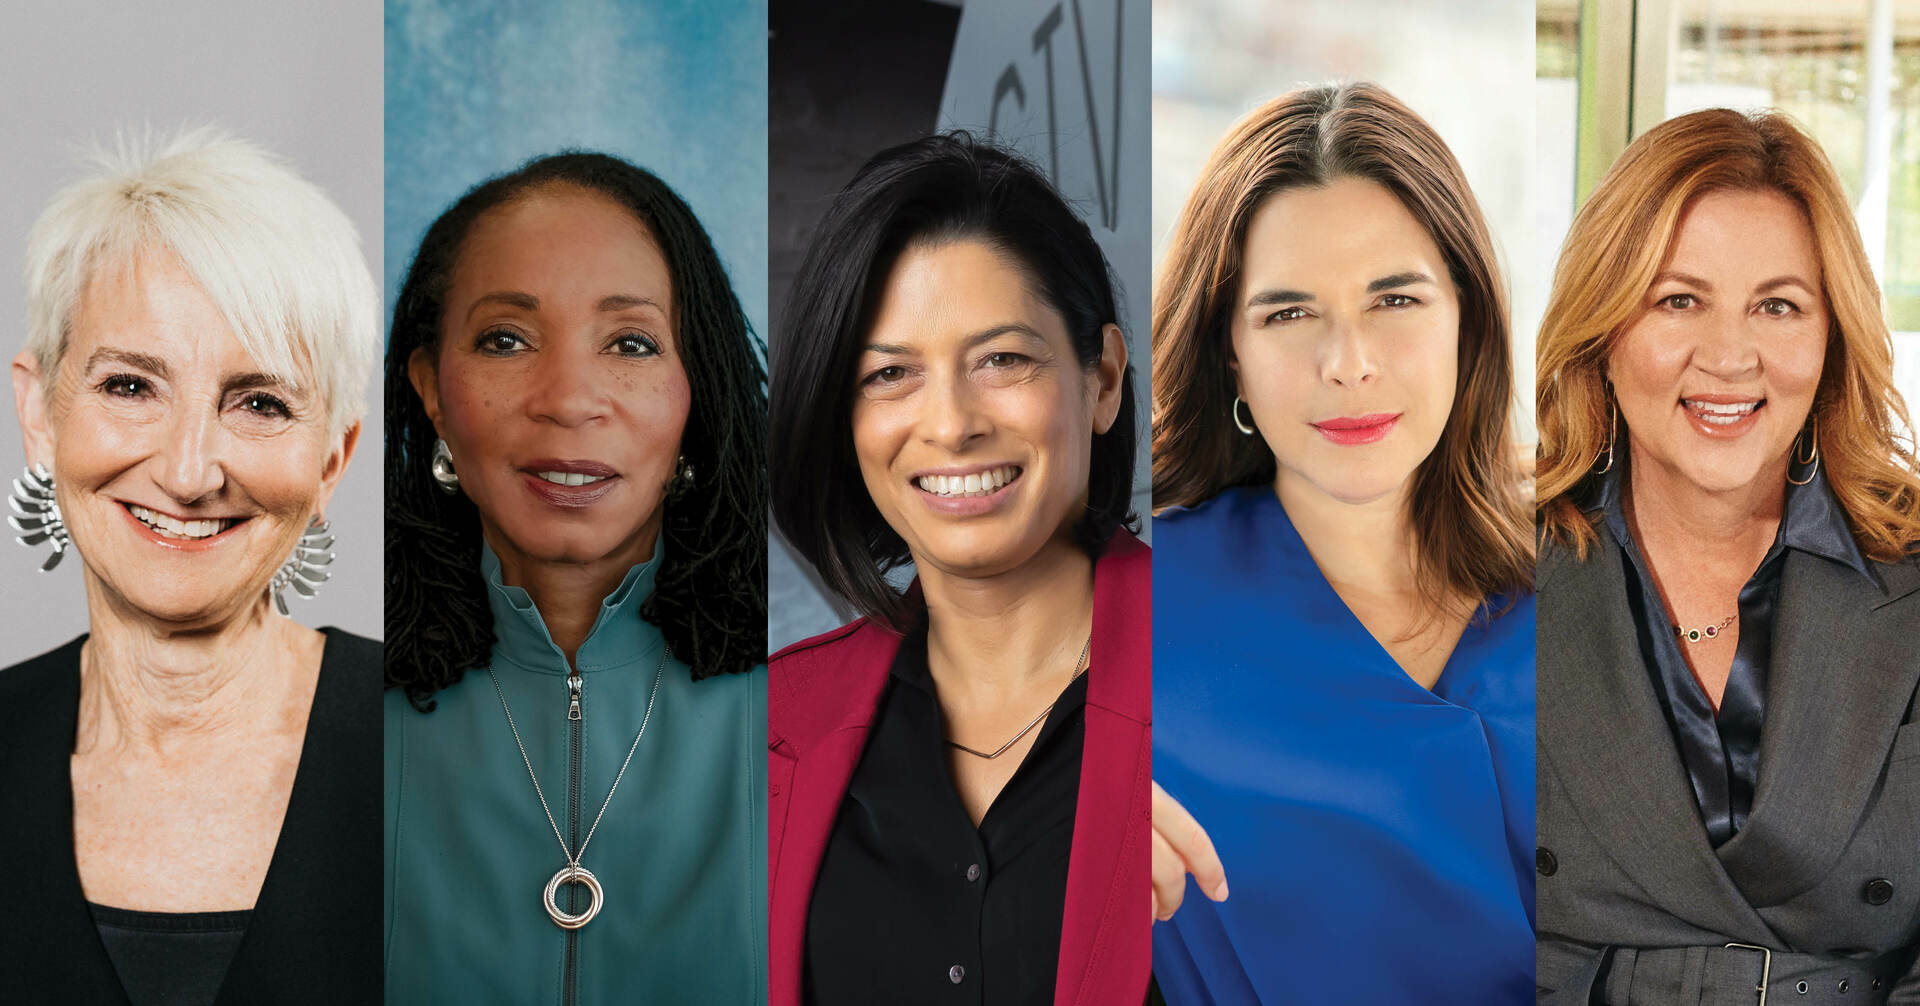 Madam President: Women Leaders in Higher Education, New Canaan, Connecticut, United States